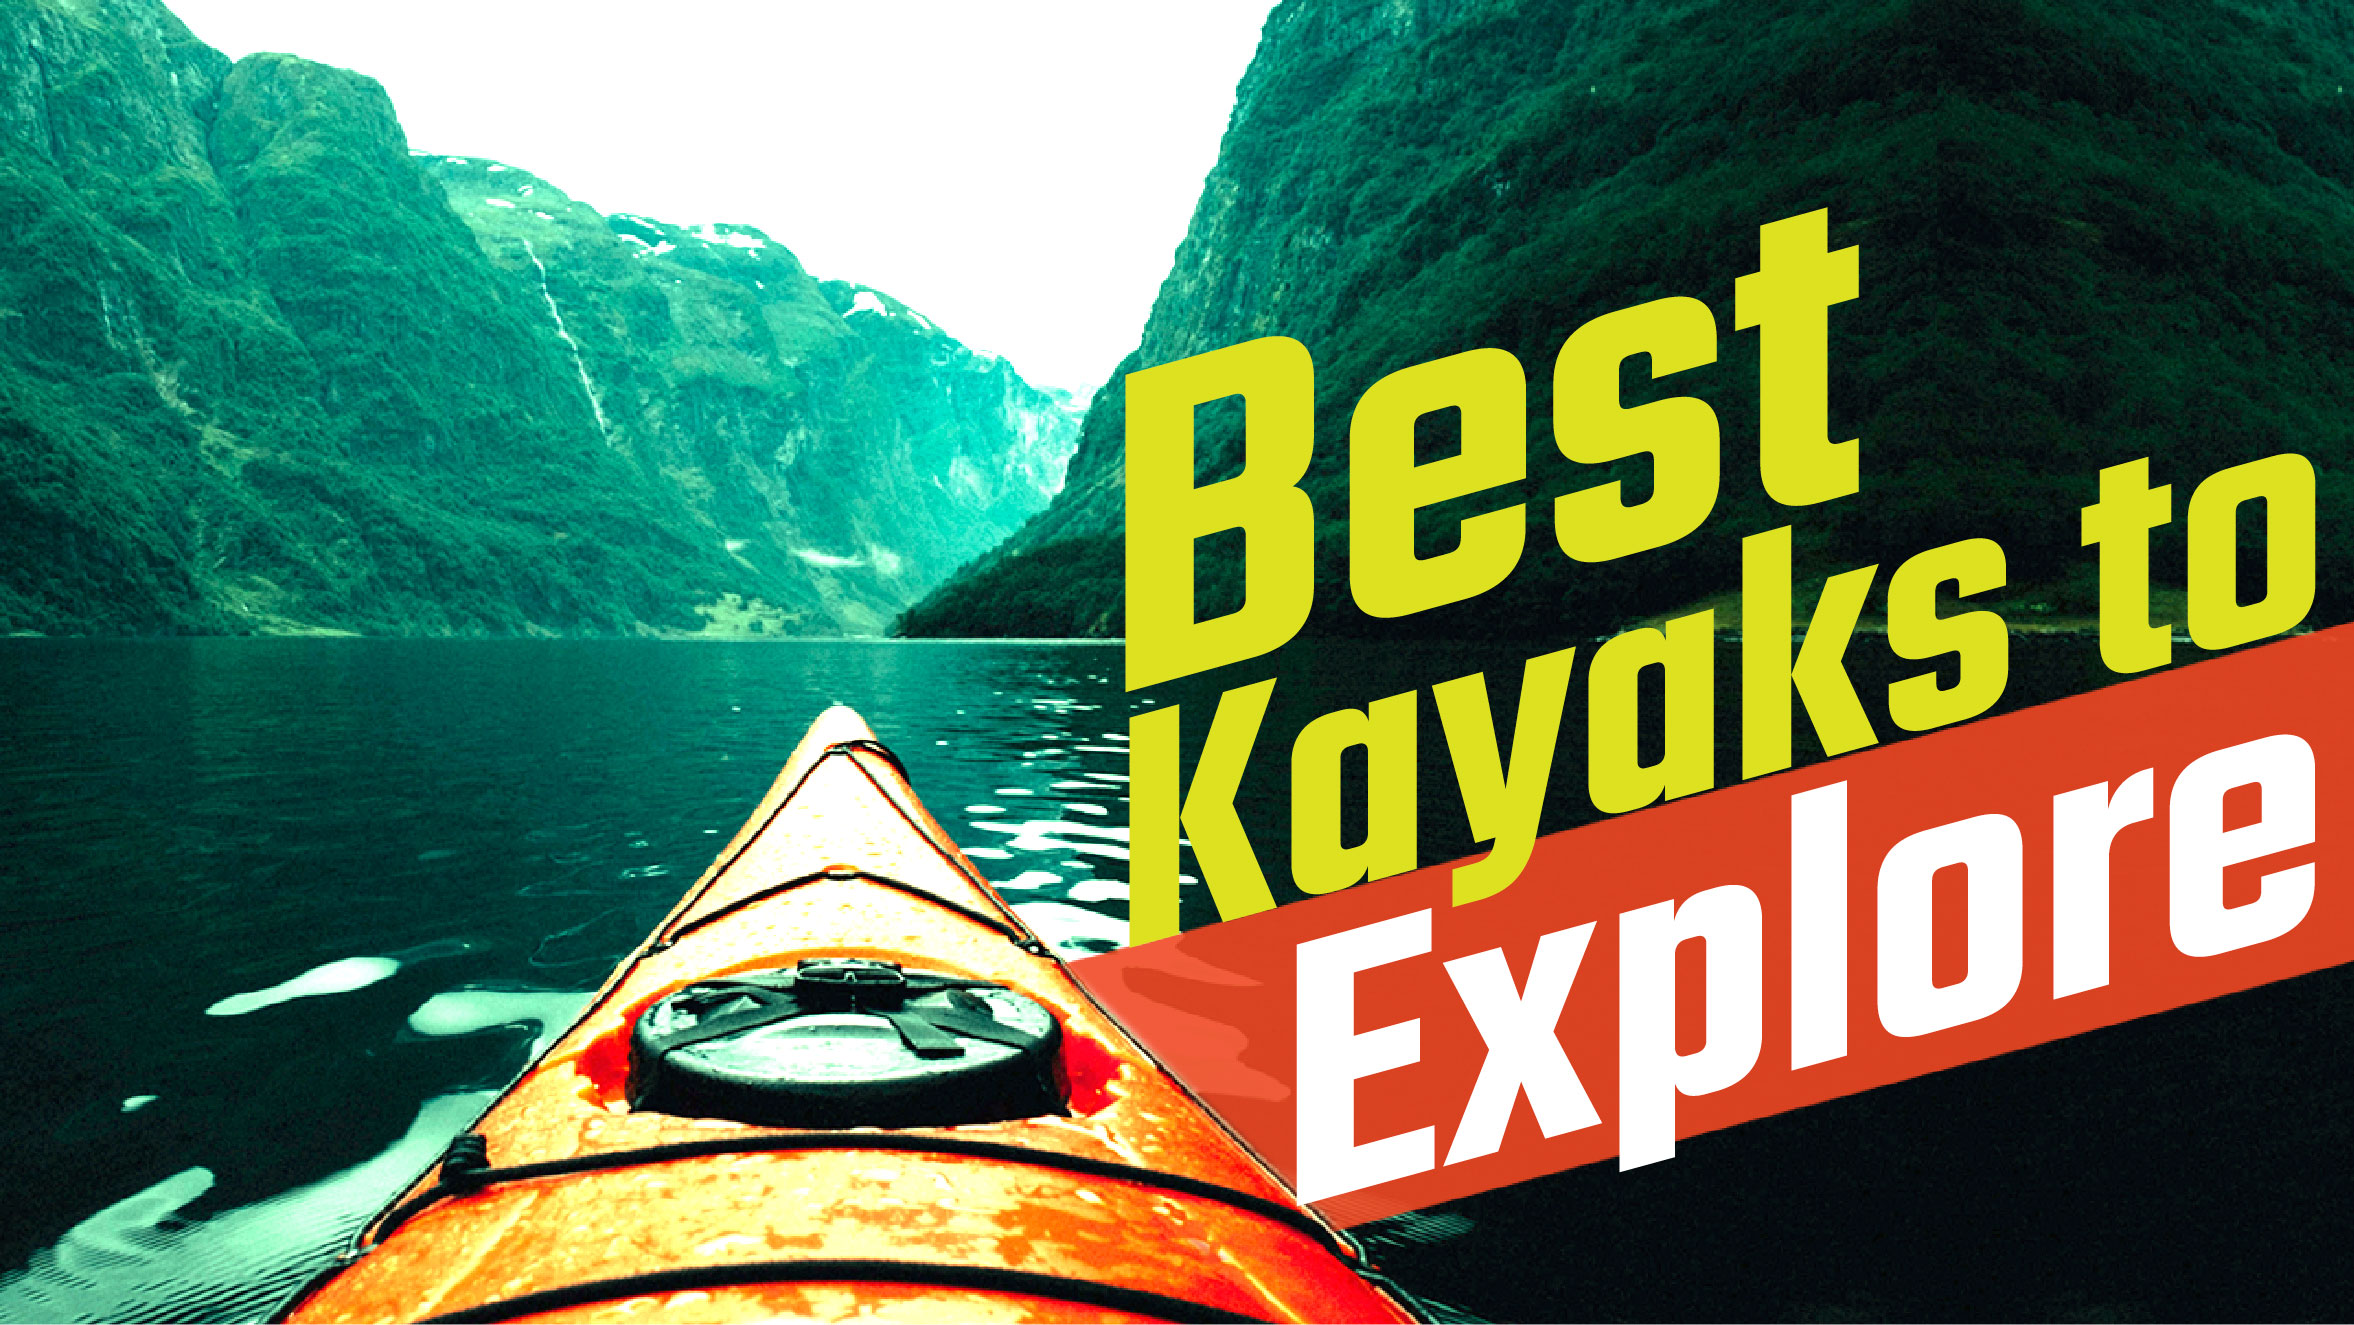 Kayaks for Outdoor Camping